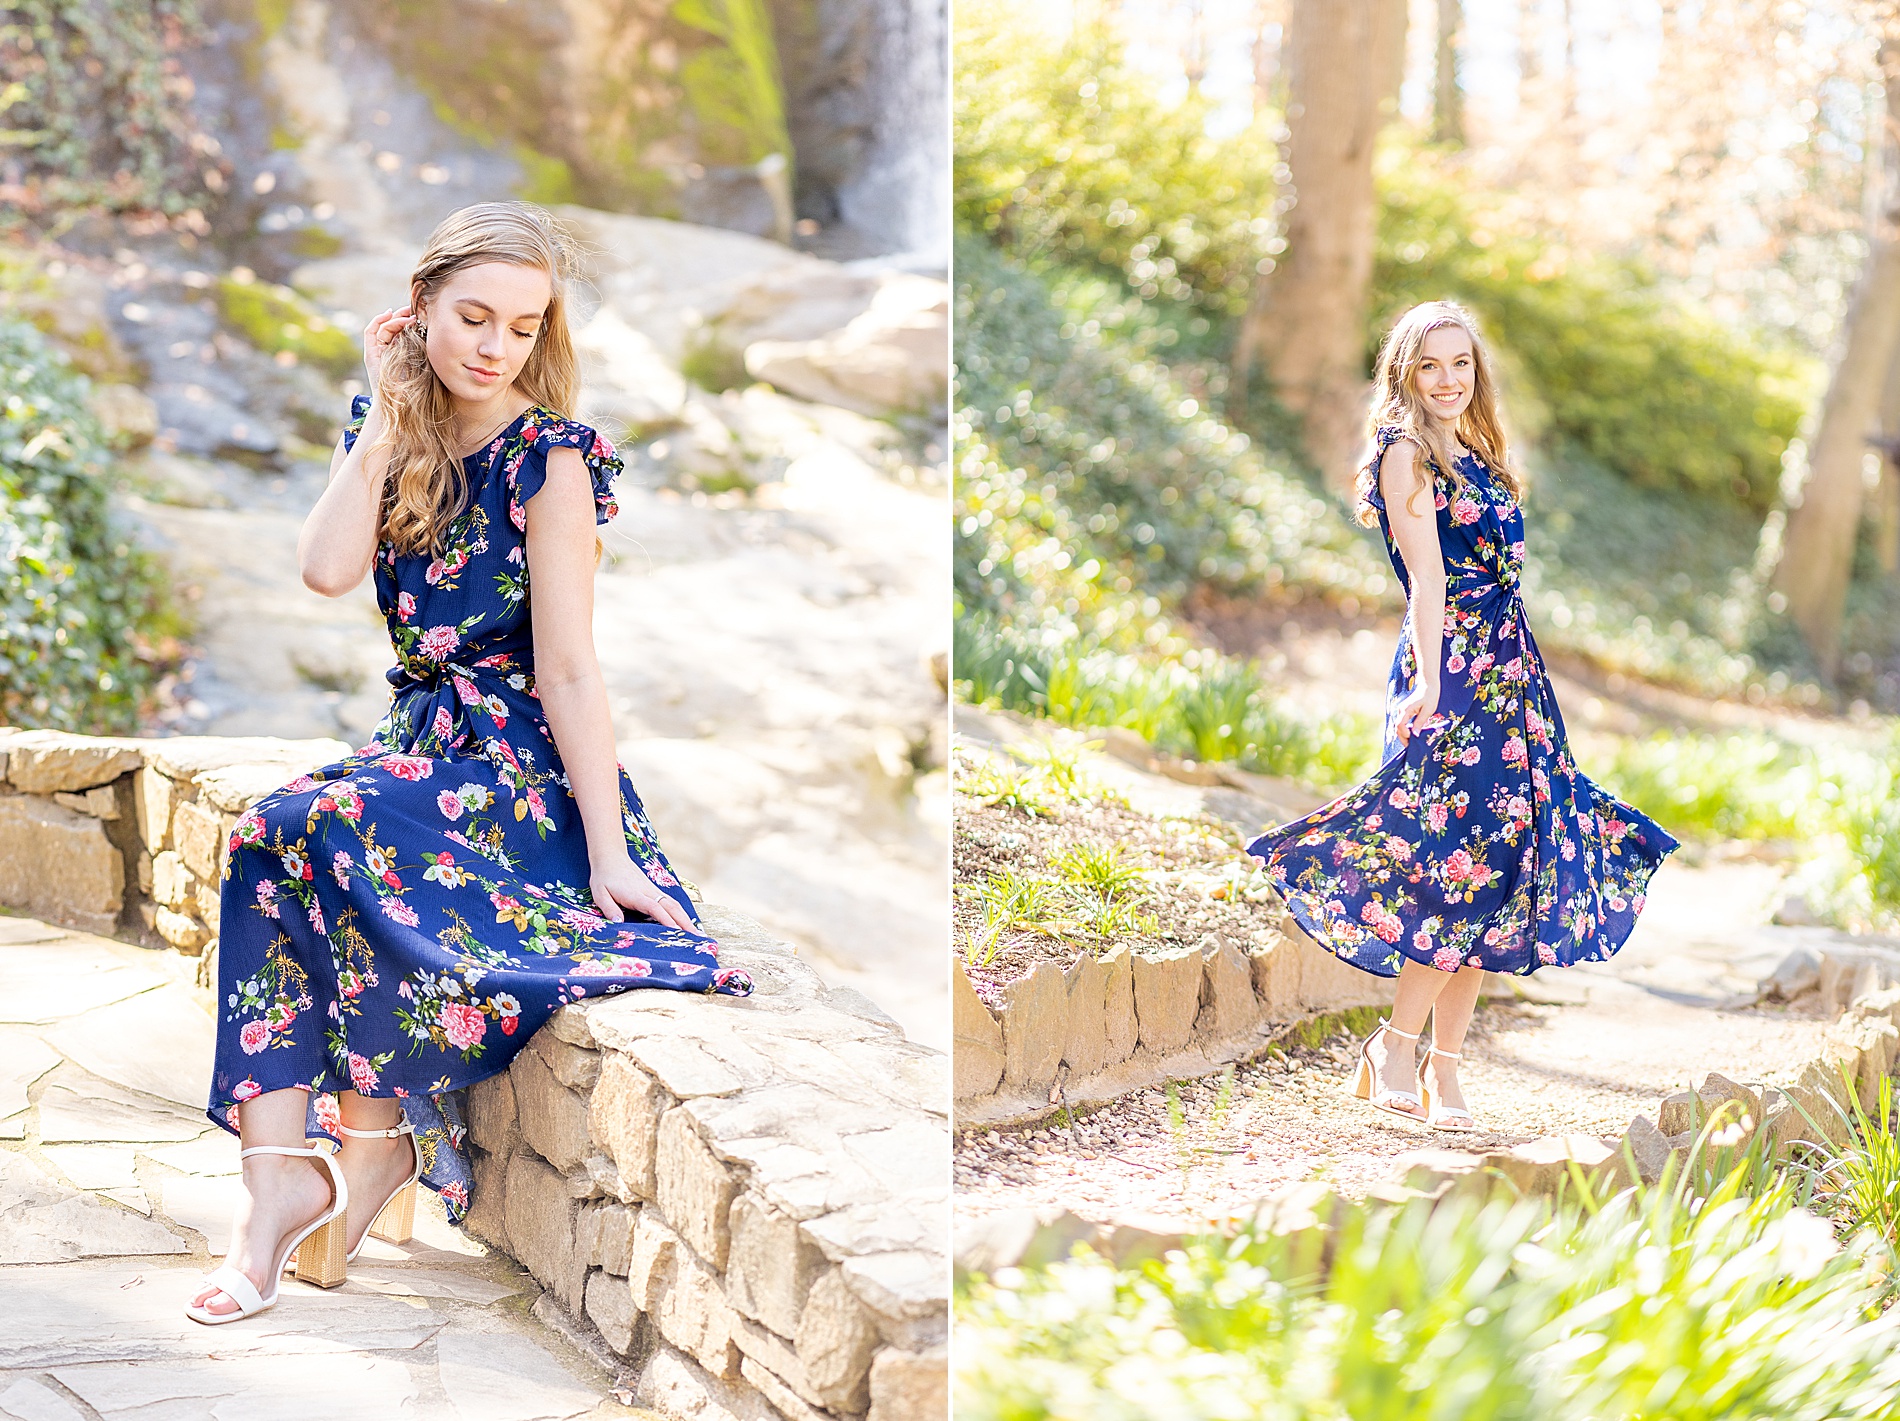 Senior portraits at Falls Park in Downtown Greenville, SC